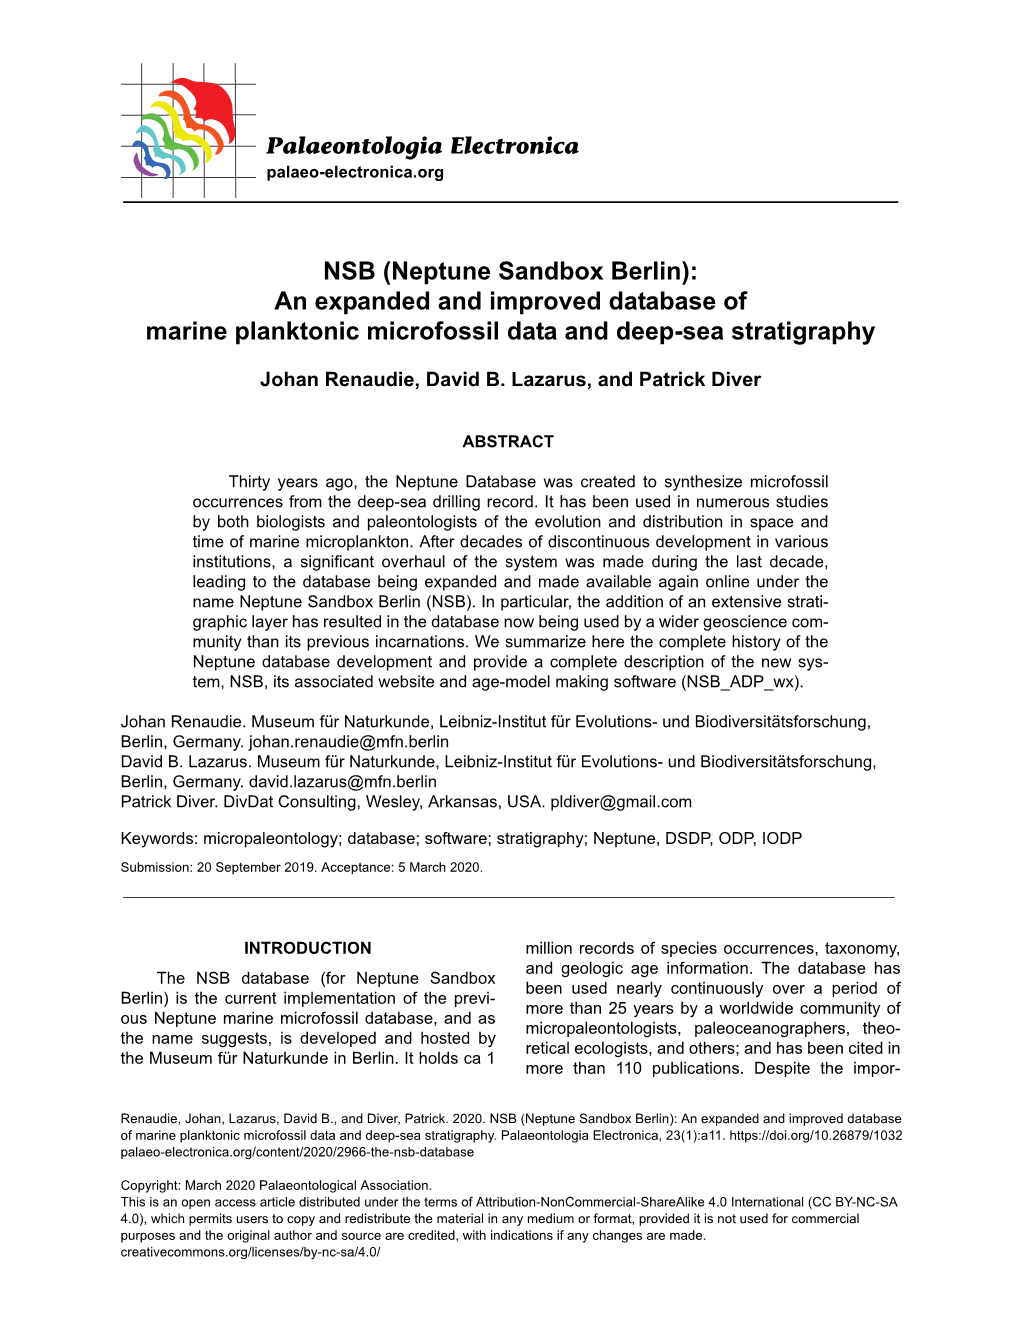 An Expanded and Improved Database of Marine Planktonic Microfossil Data and Deep-Sea Stratigraphy